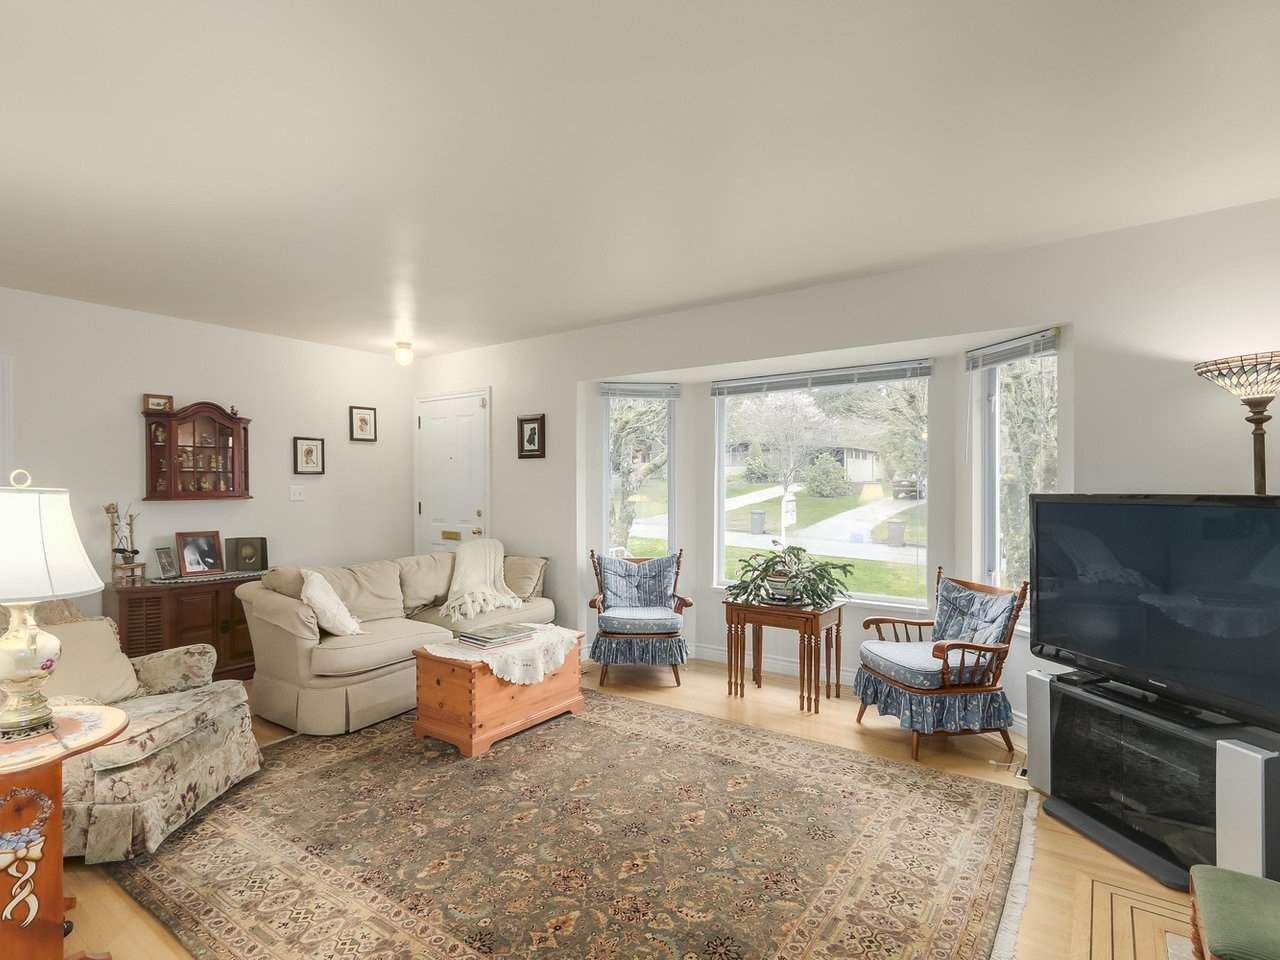 Photo 10: Photos: 672 FLORENCE Street in Coquitlam: Coquitlam West House for sale : MLS®# R2255976